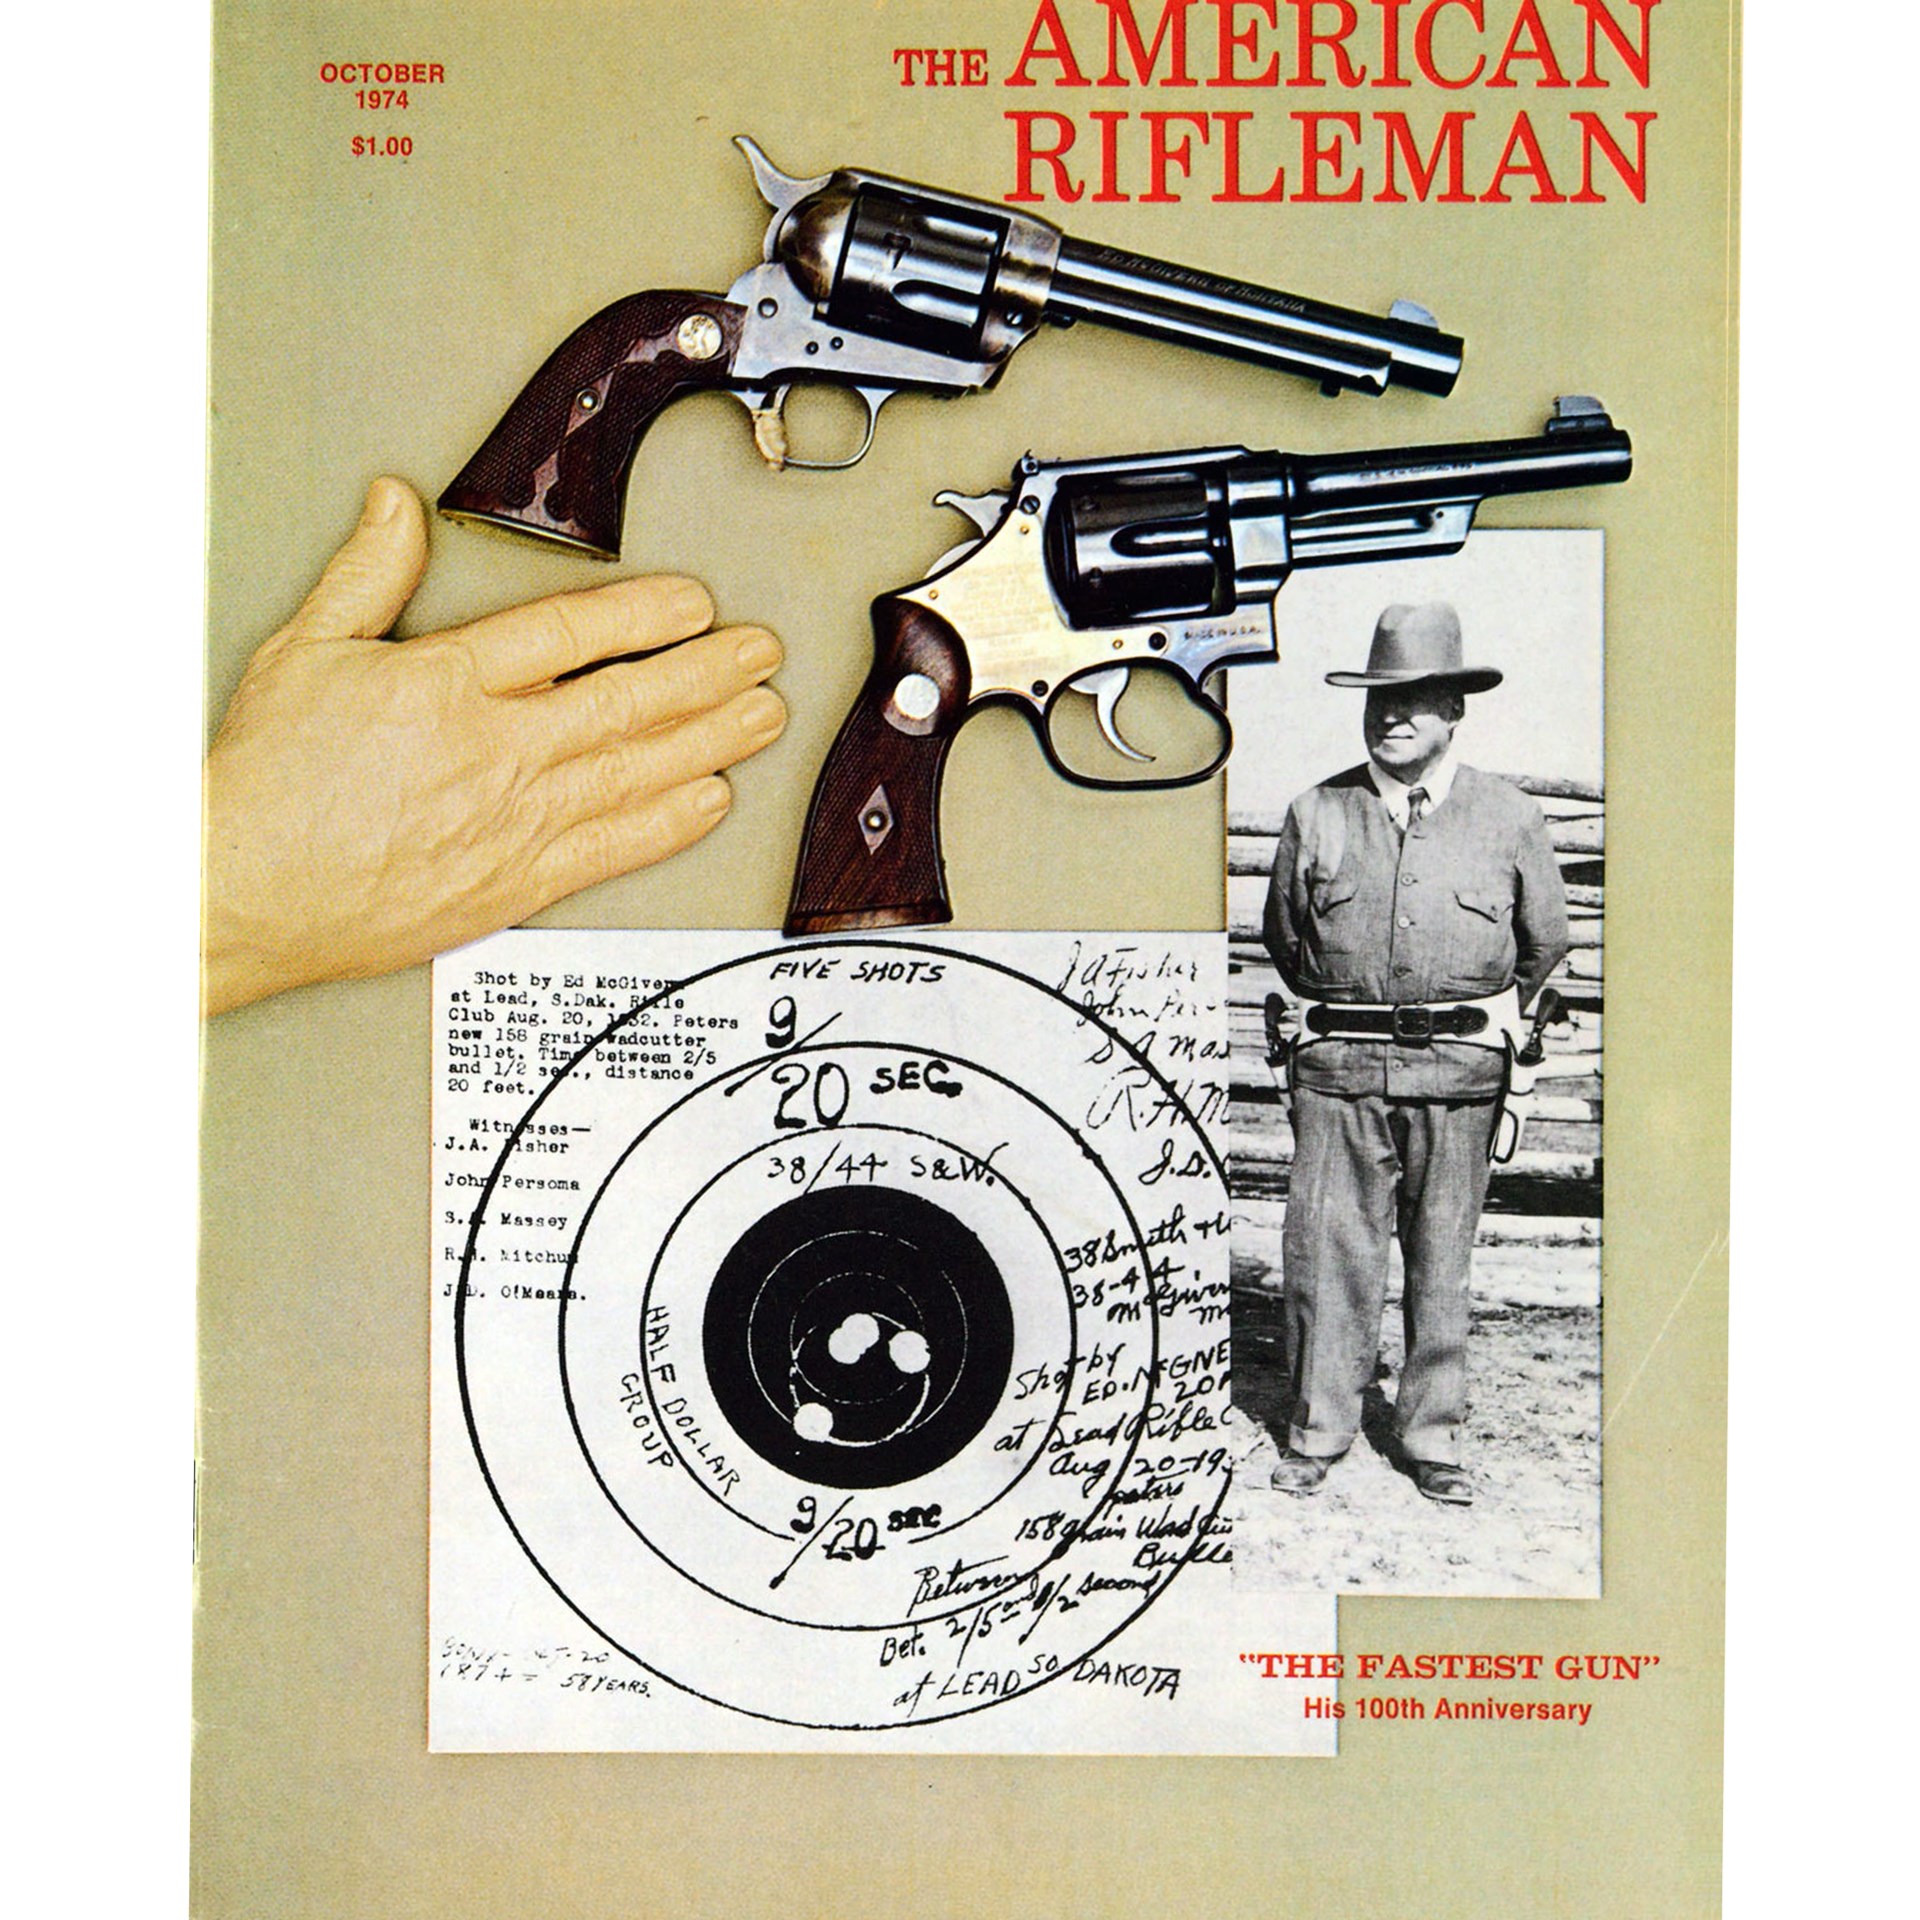 October 1974 magazine cover showing two revolvers a man in uniform and bullseye target with right hand outstreched across page